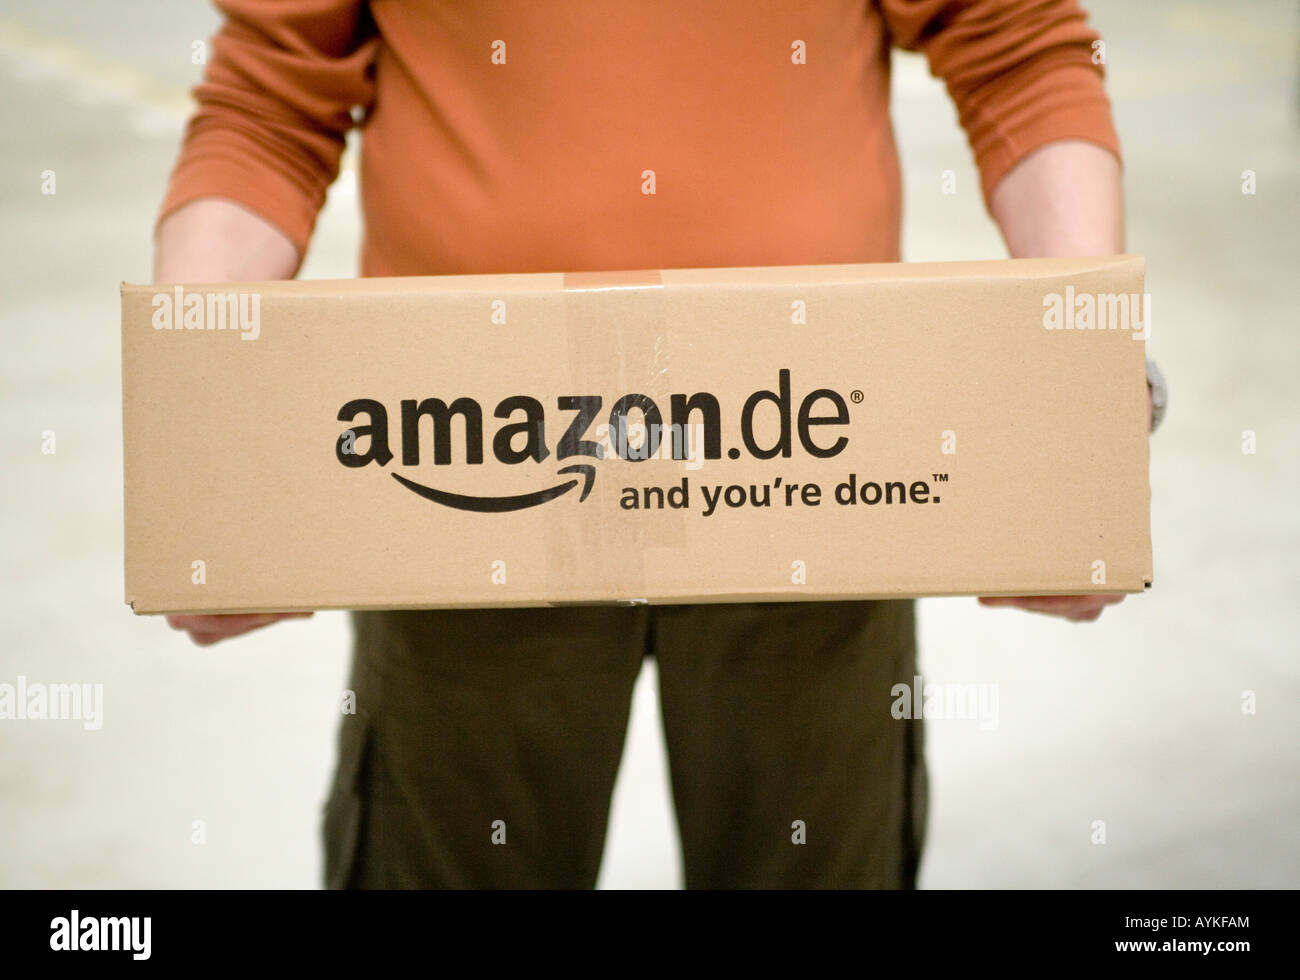 Distribution centre of the online order company amazon de ordered goods ready for shipping Stock Photo